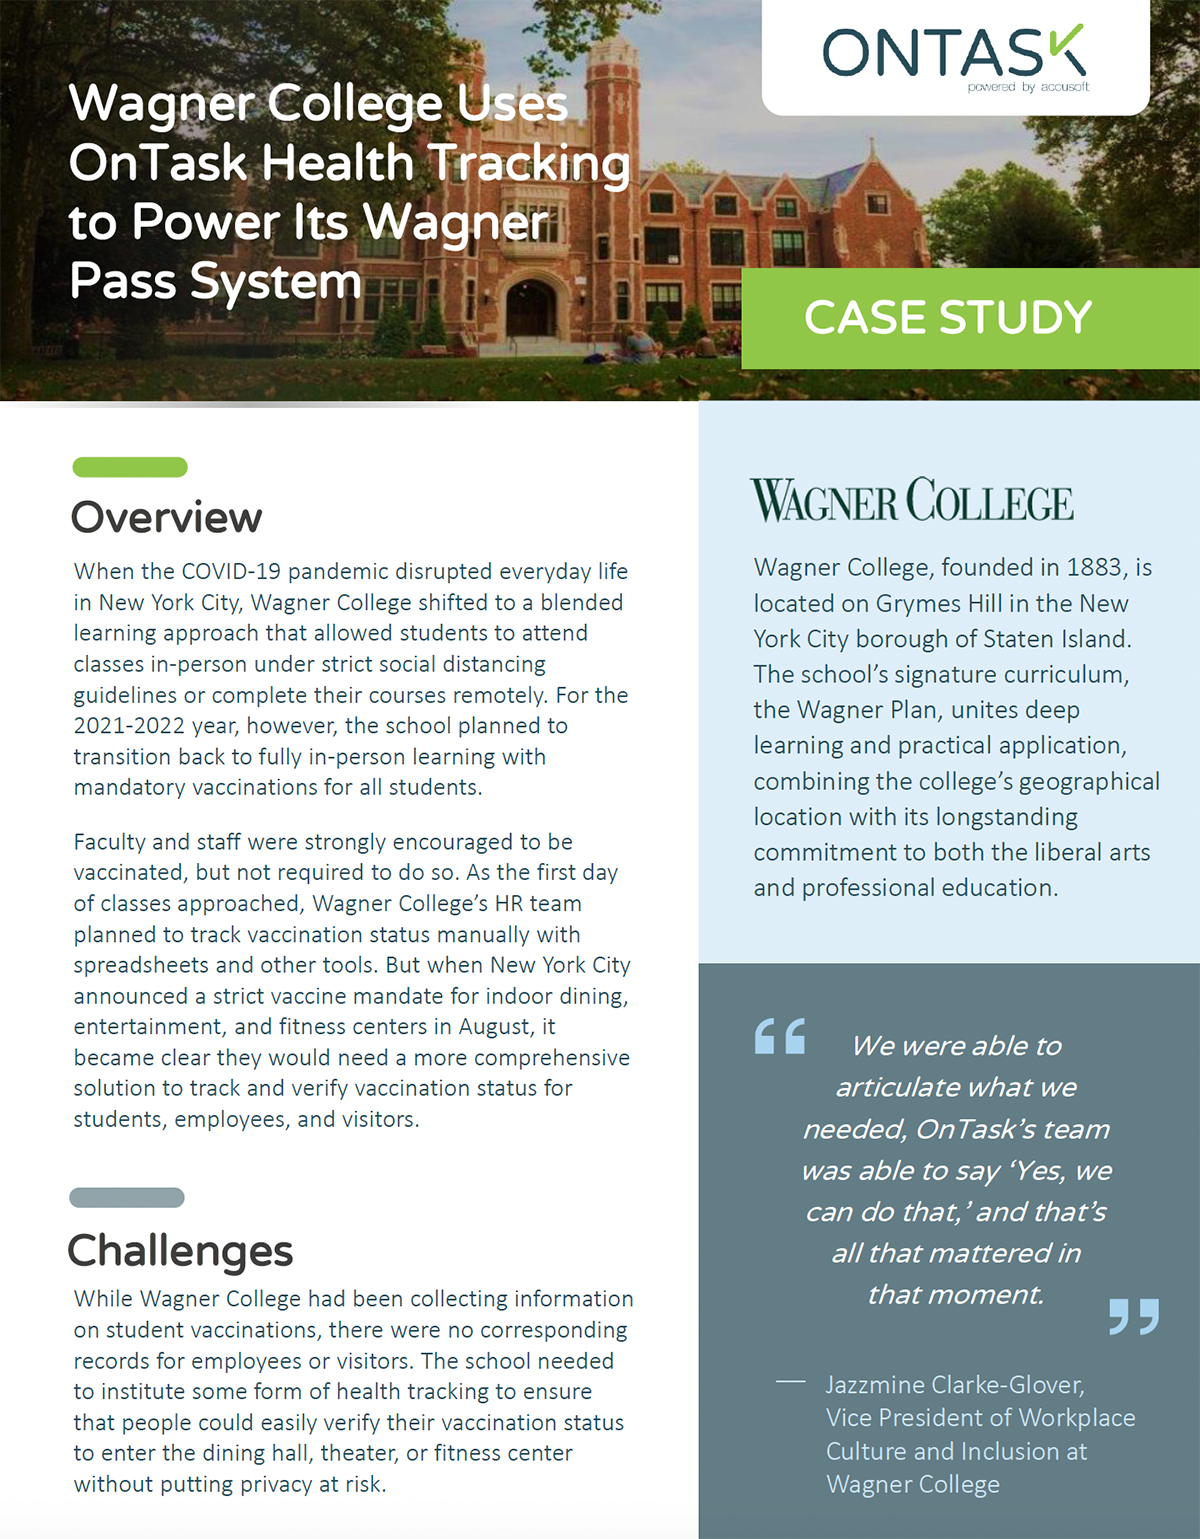 Cover of Wagner College case study